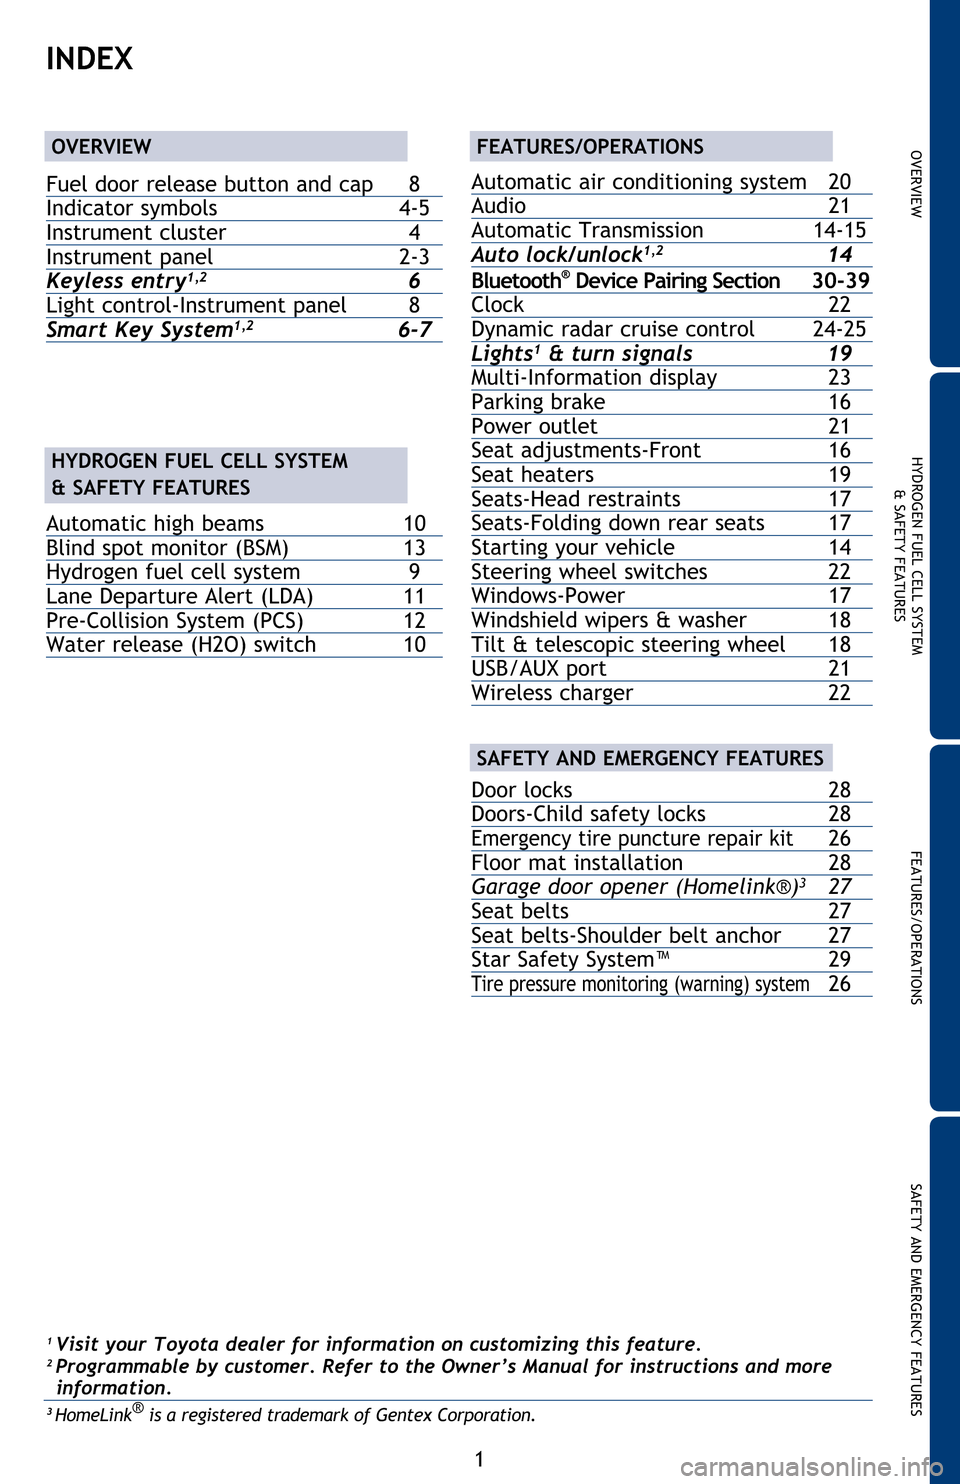 TOYOTA MIRAI 2016 1.G Quick Reference Guide 1
OVERVIEWHYDROGEN FUEL CELL SYSTEM
& SAFETY FEATURESFEATURES/OPERATIONS
SAFETY AND EMERGENCY FEATURES
INDEX
1 Visit your Toyota dealer for information on customizing this feature.2 Programmable by cu